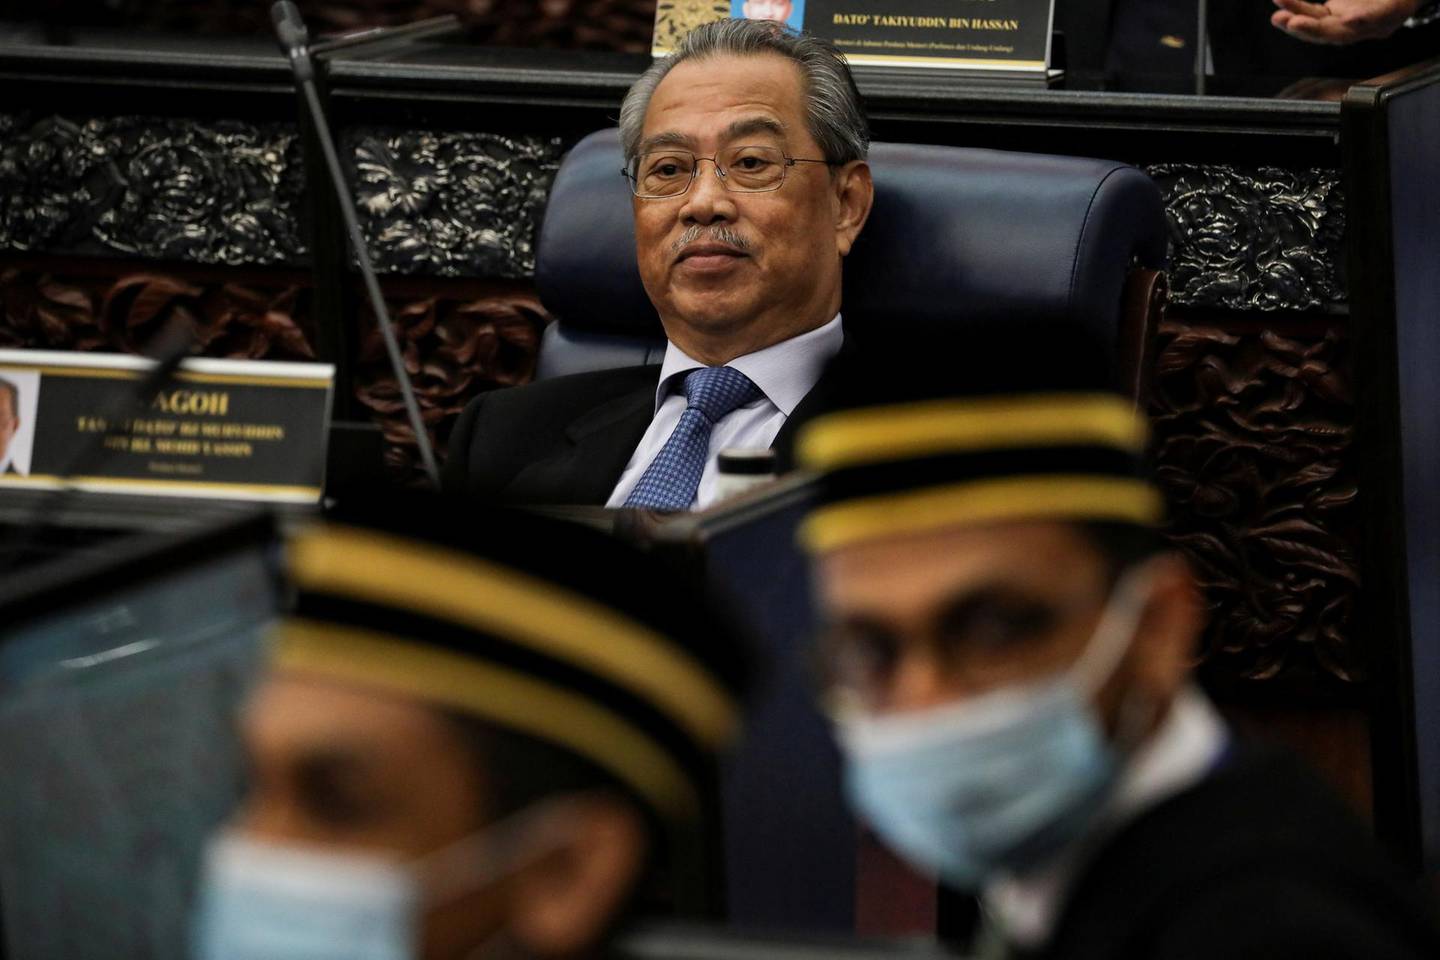 FILE PHOTO: Malaysia's Prime Minister Muhyiddin Yassin reacts during a session of the lower house of parliament, in Kuala Lumpur, Malaysia July 13, 2020. REUTERS/Lim Huey Teng/File Photo